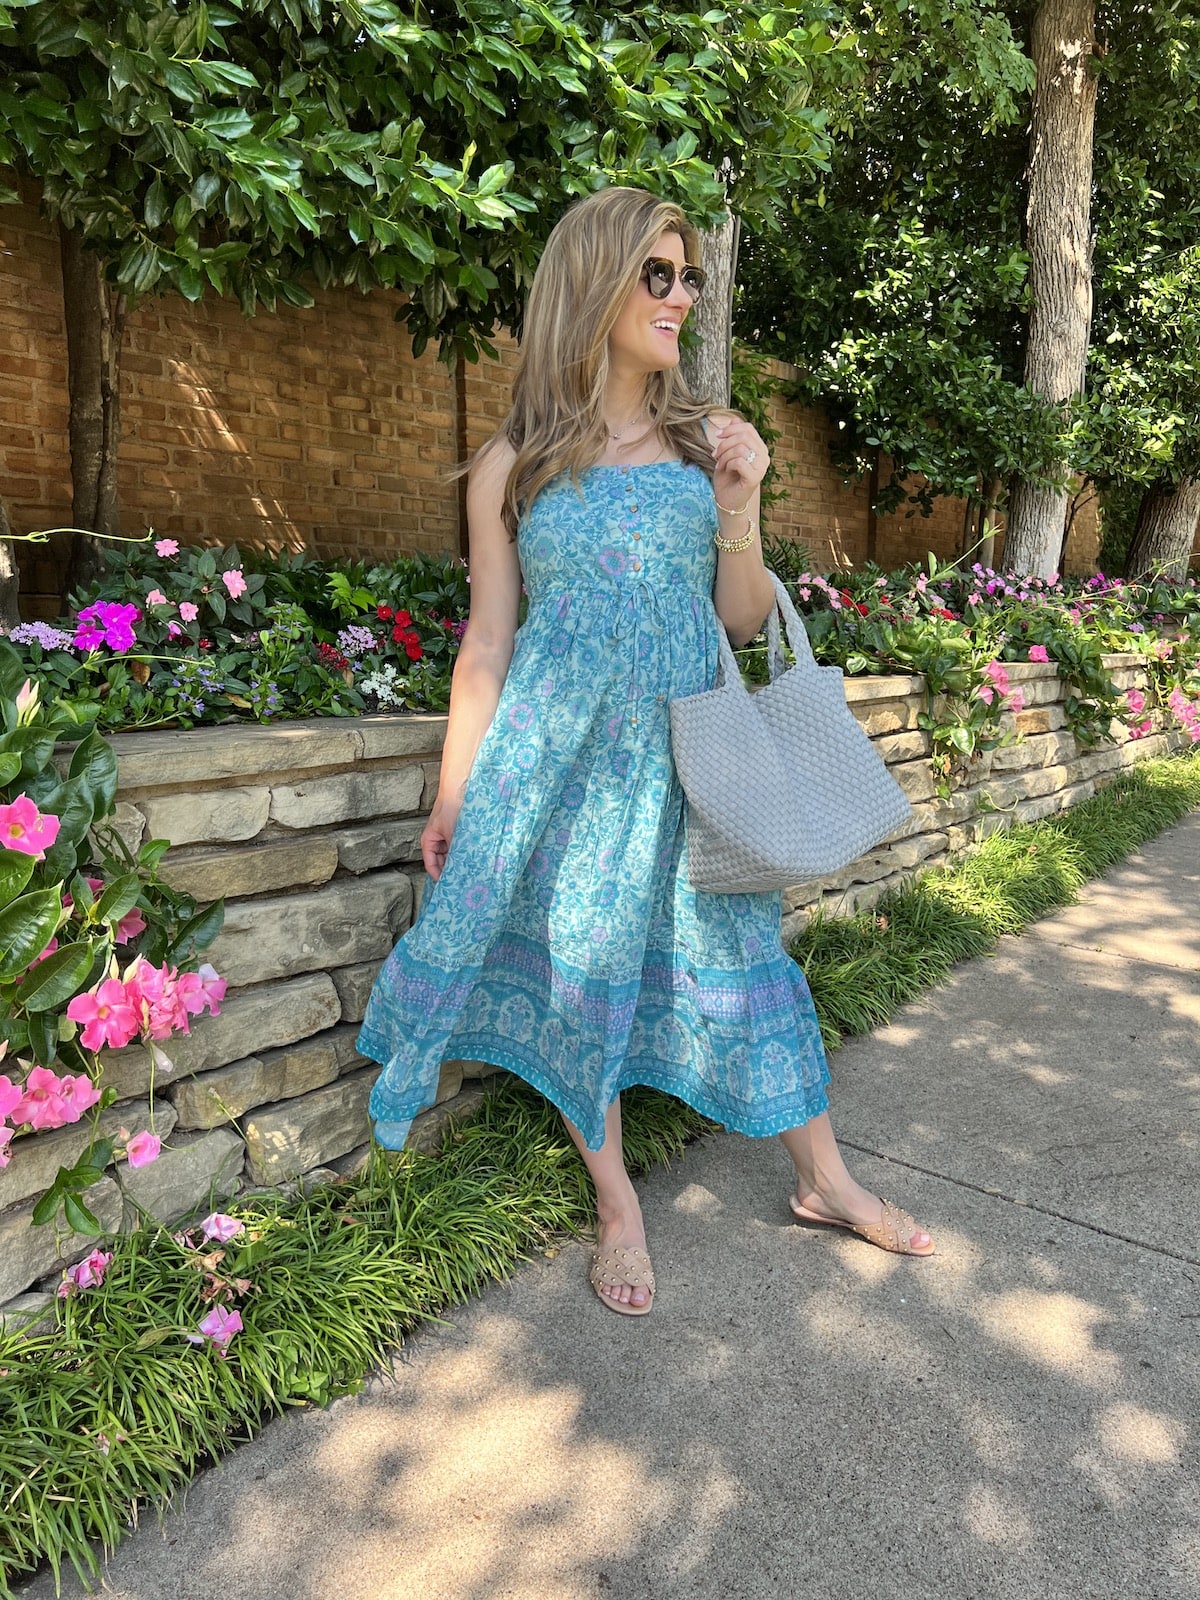 Brighton Butler wearing revolve blue floral dress with blue beach bag